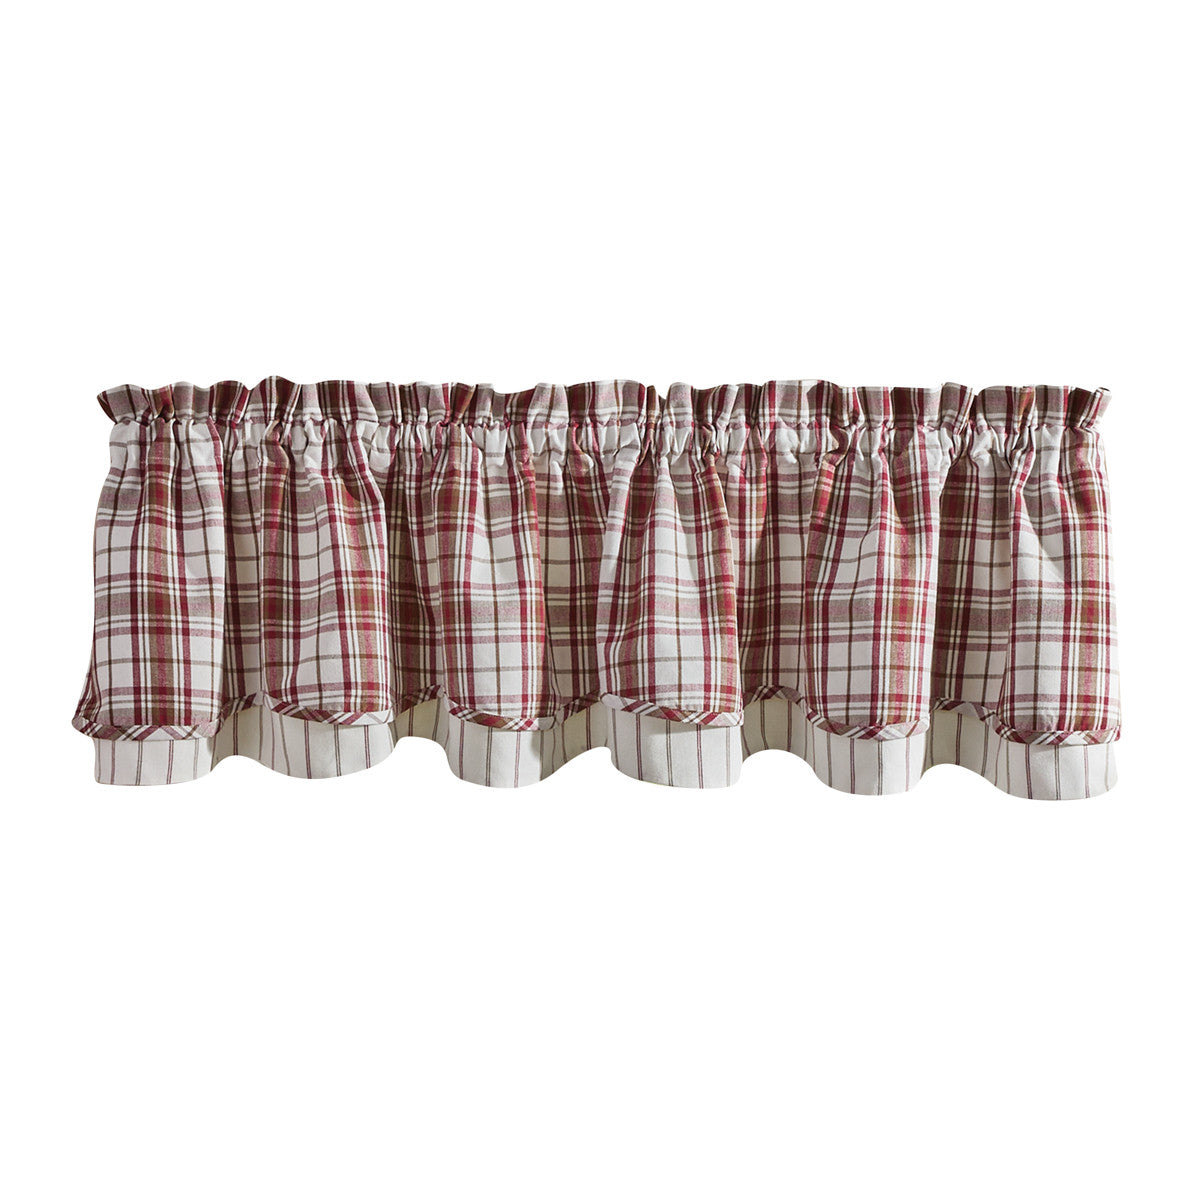 Homestyle Lined Layered Valance 16" L - Set of 2 Park designs